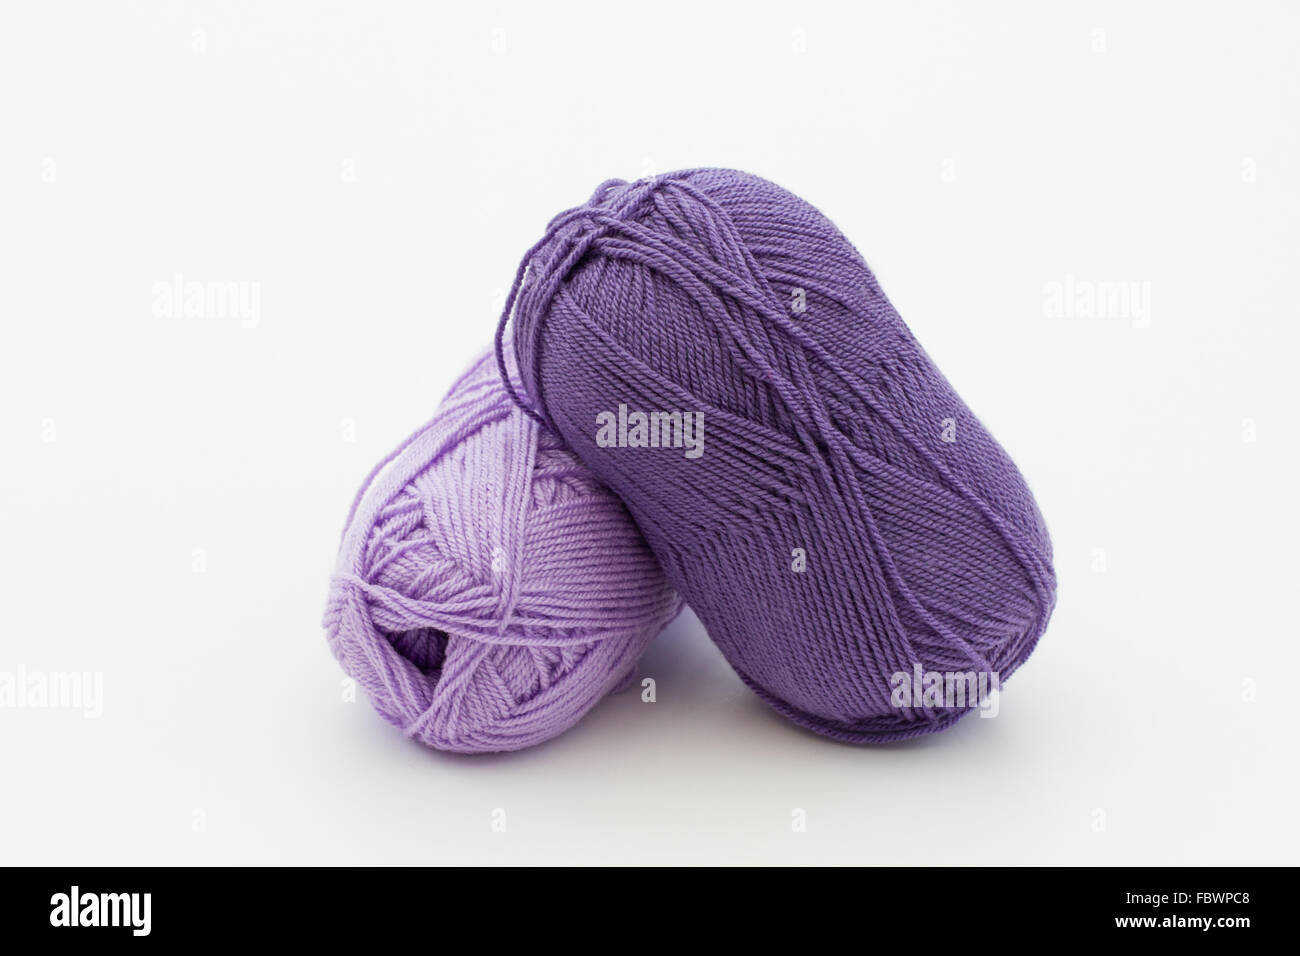 Two balls of wool in a purple color on an isolated white background. Stock Photo